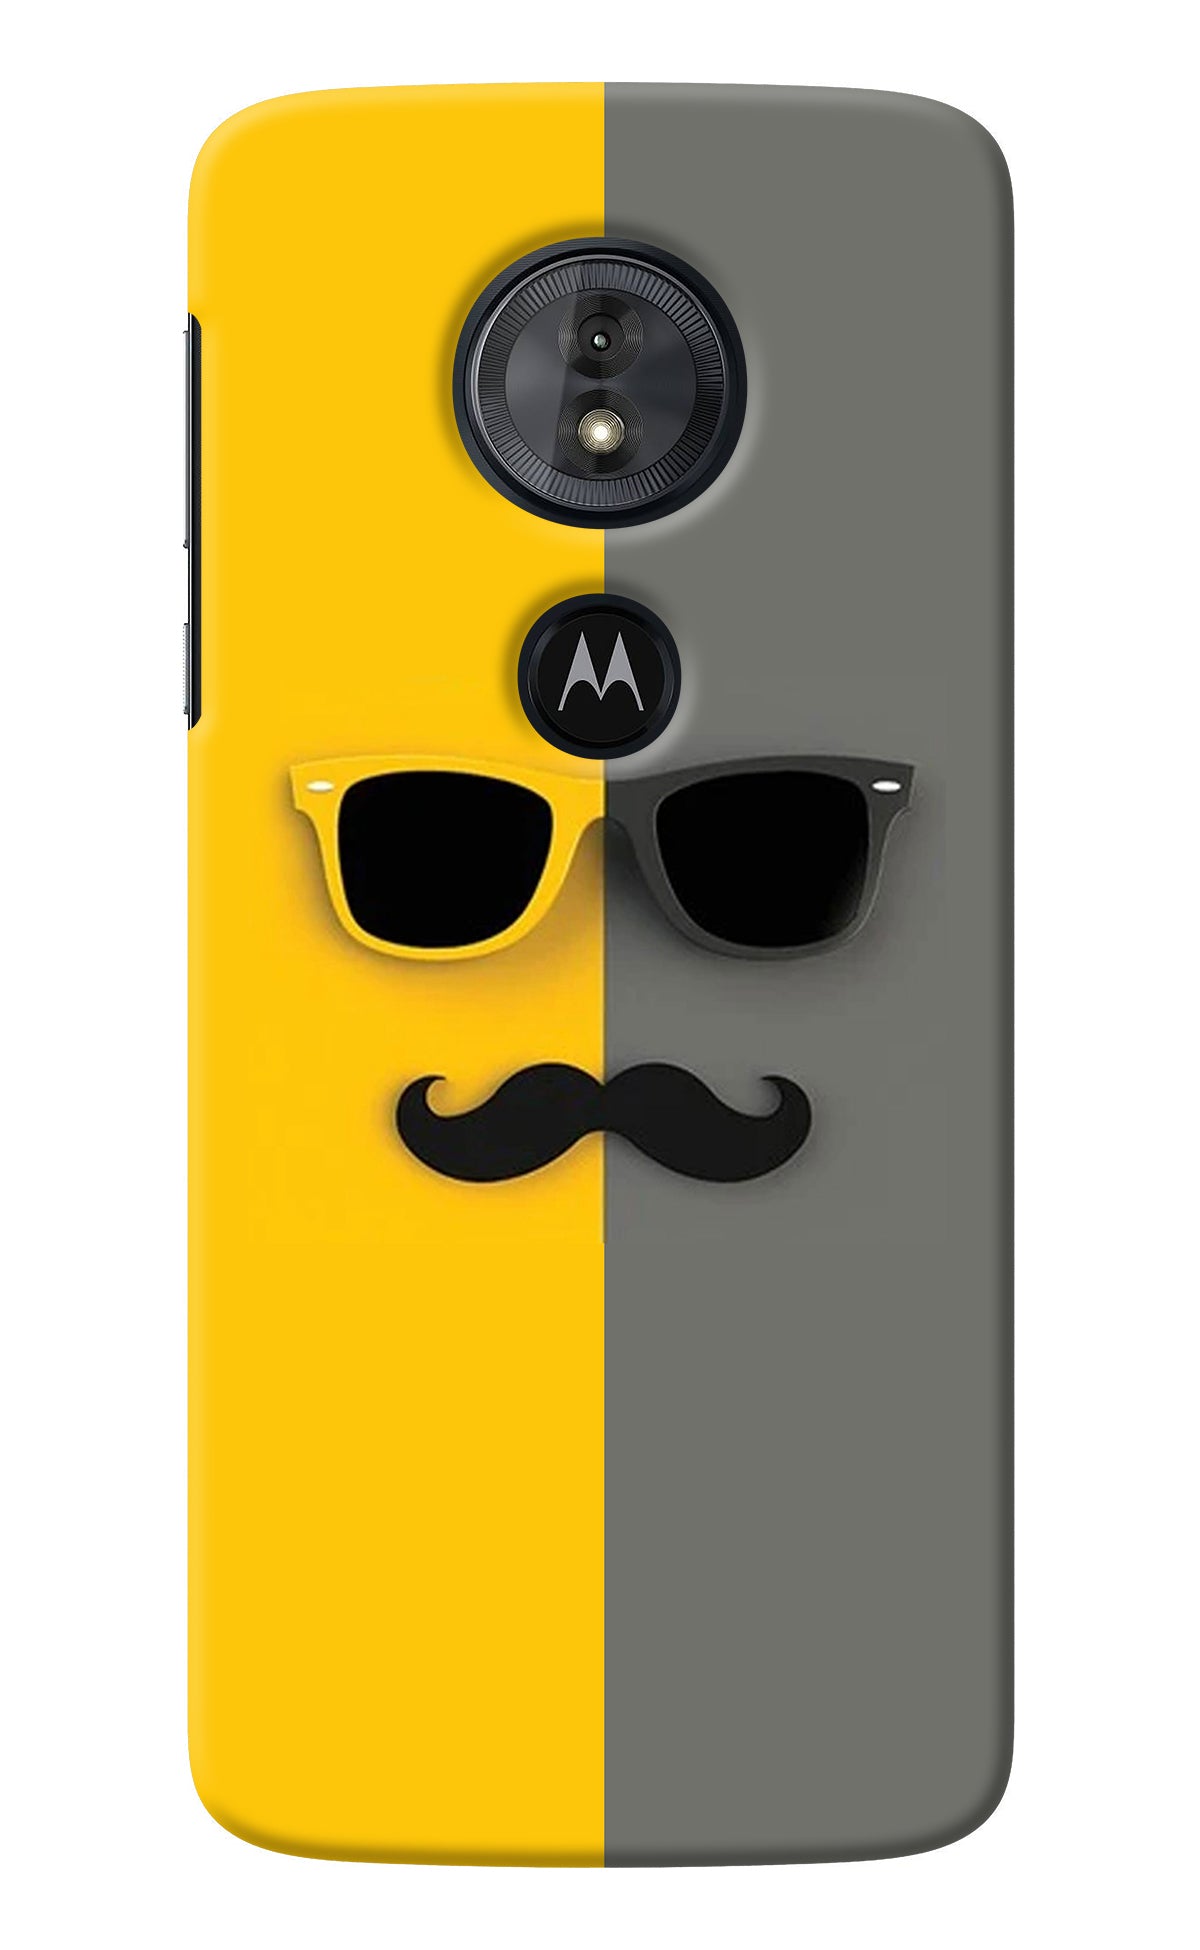 Sunglasses with Mustache Moto G6 Play Back Cover